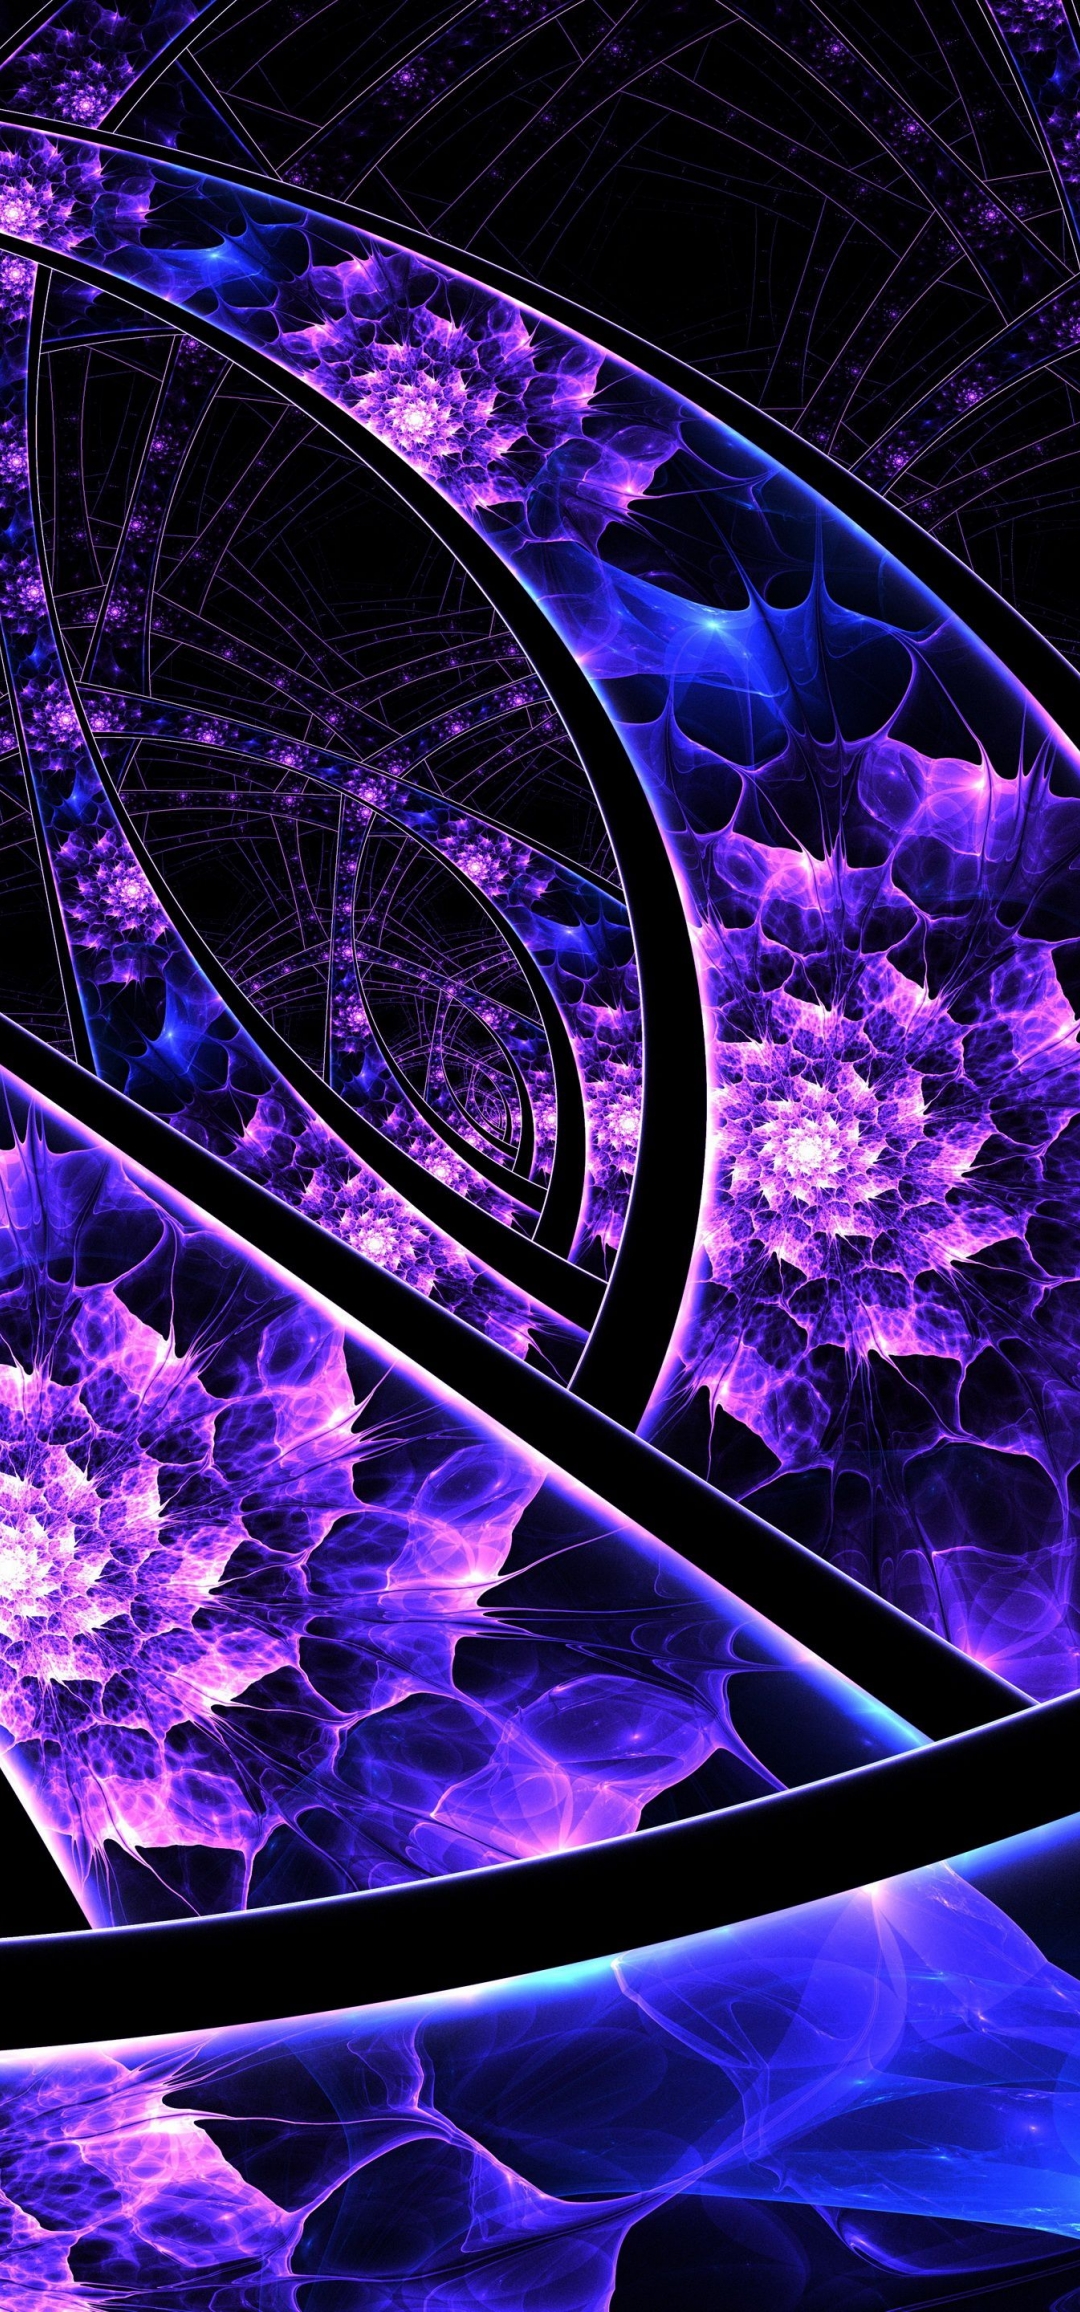 Abstract Fractal Curve Blue Purple Wallpaper 2019 x